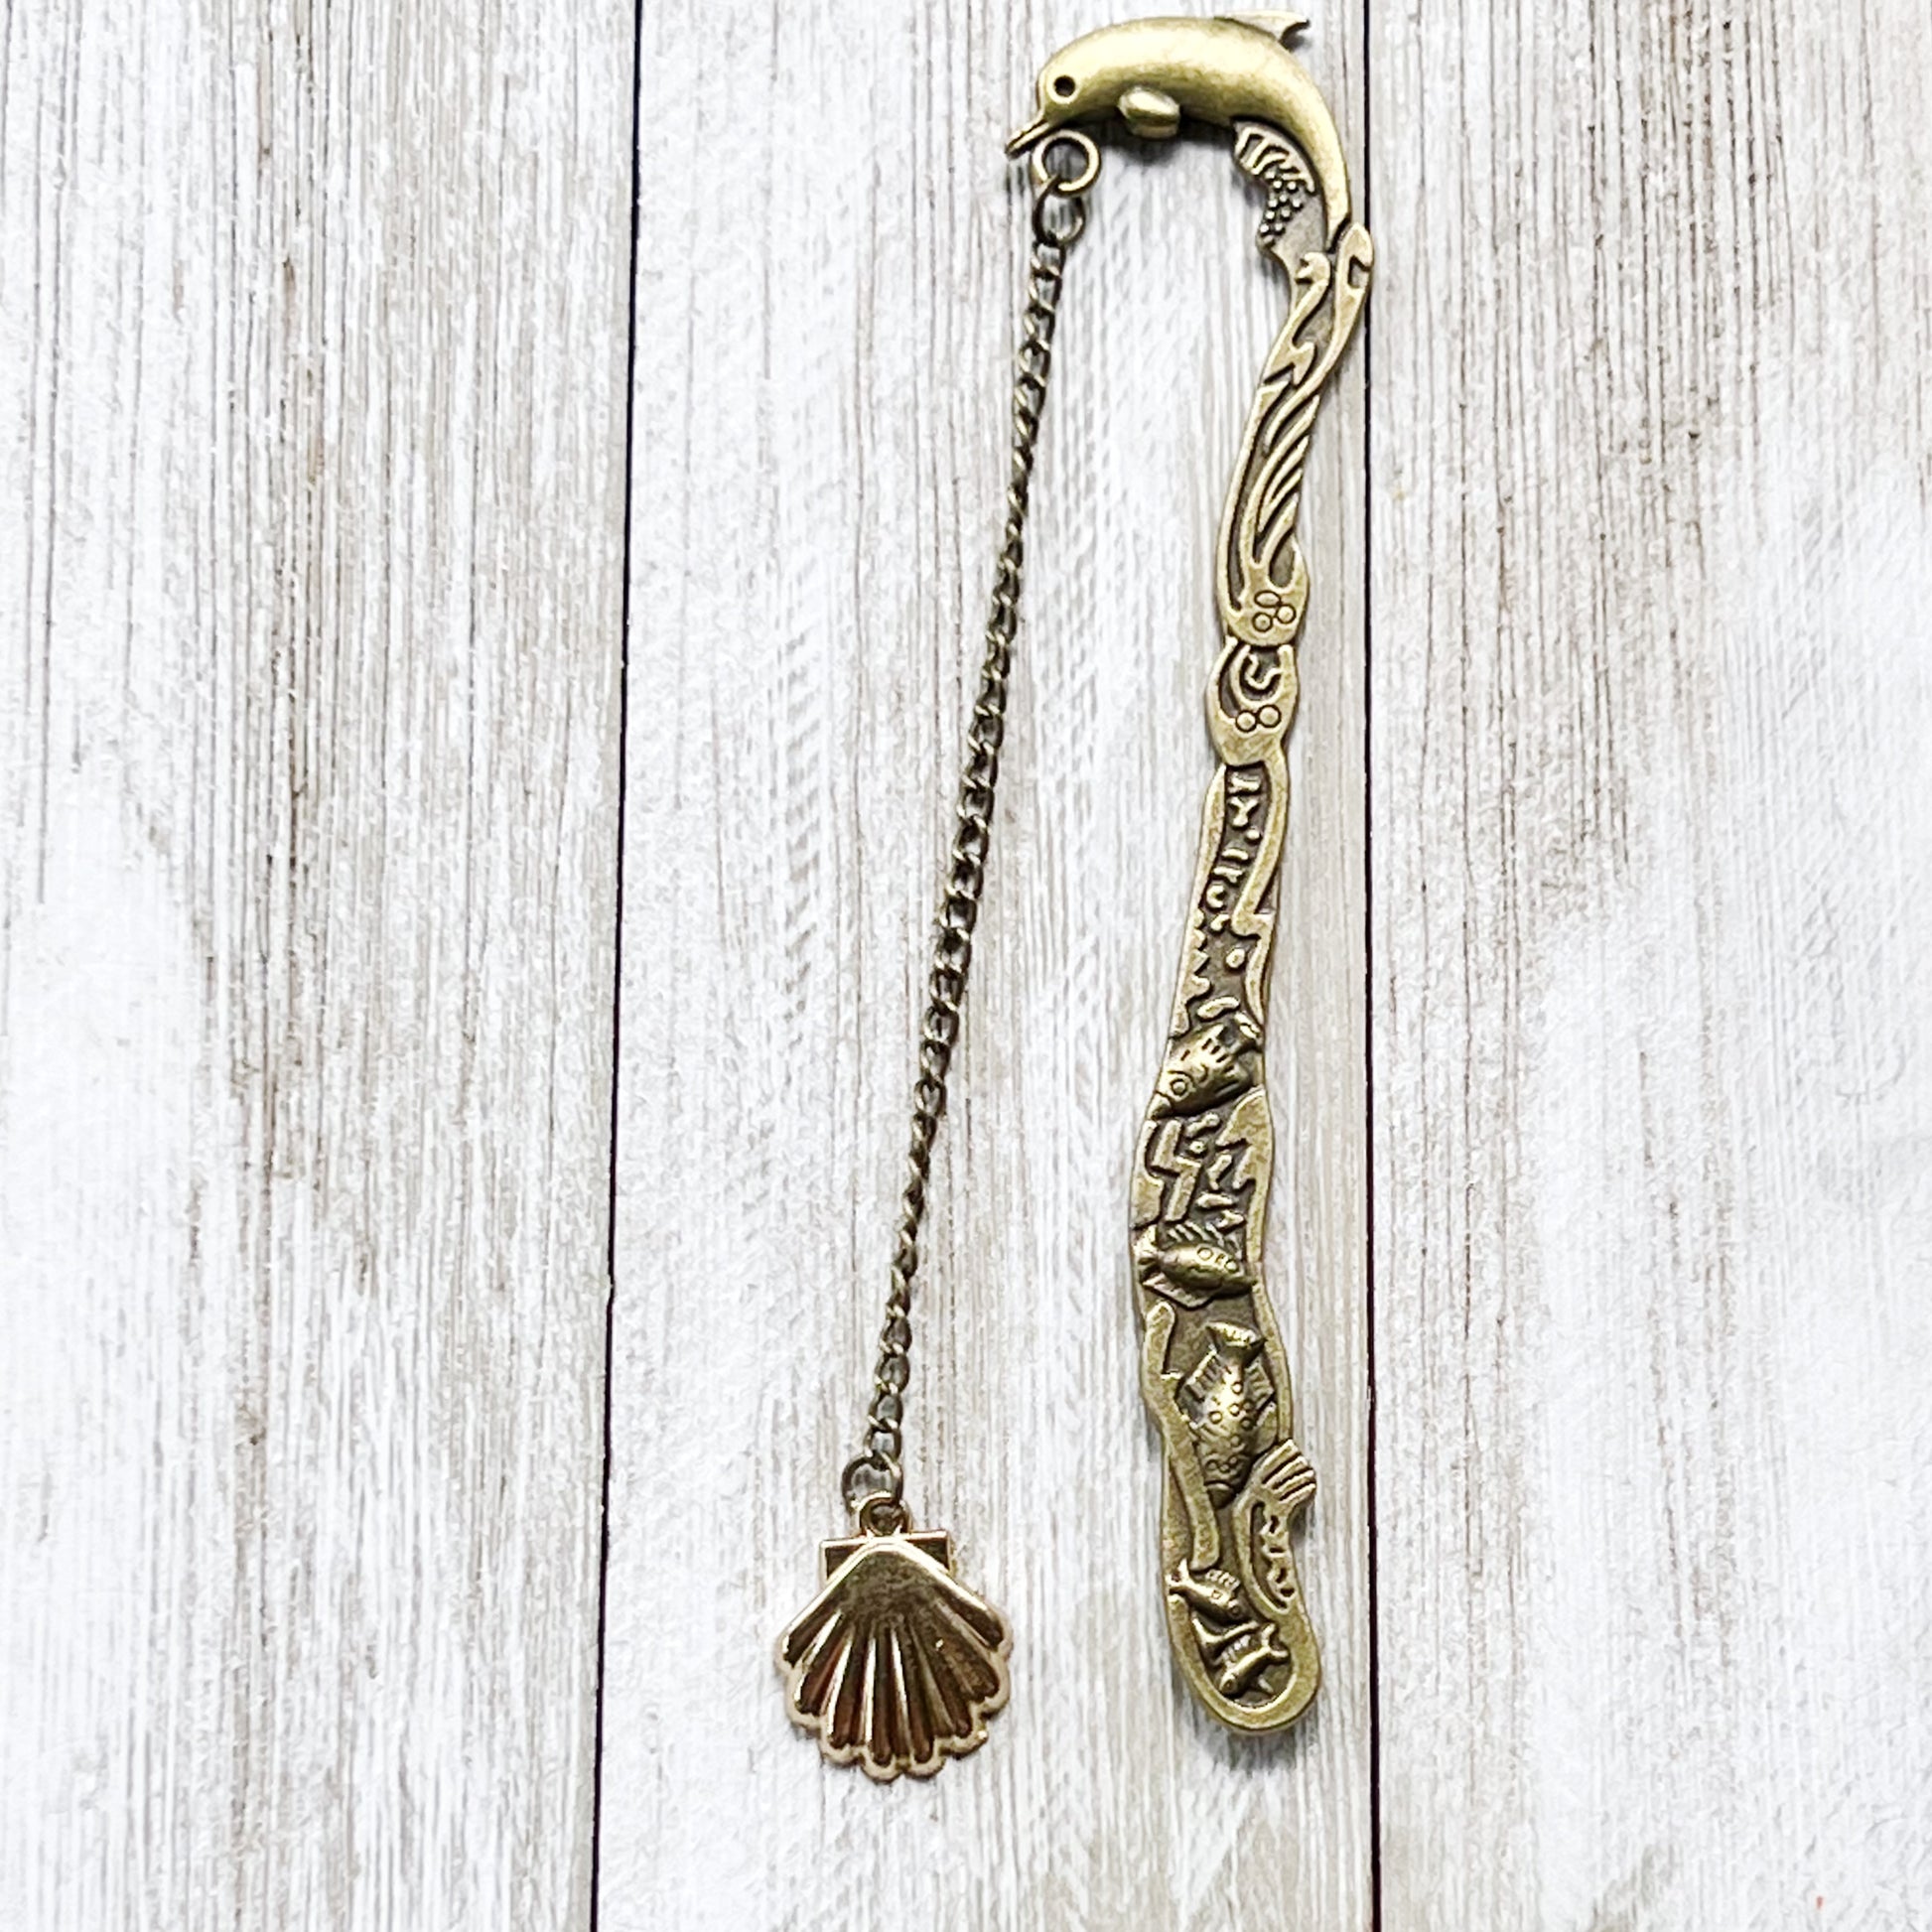 Metal Dolphin Bookmark with Seashell Dangle Chain Charm - Coastal-Inspired Reading Accessory